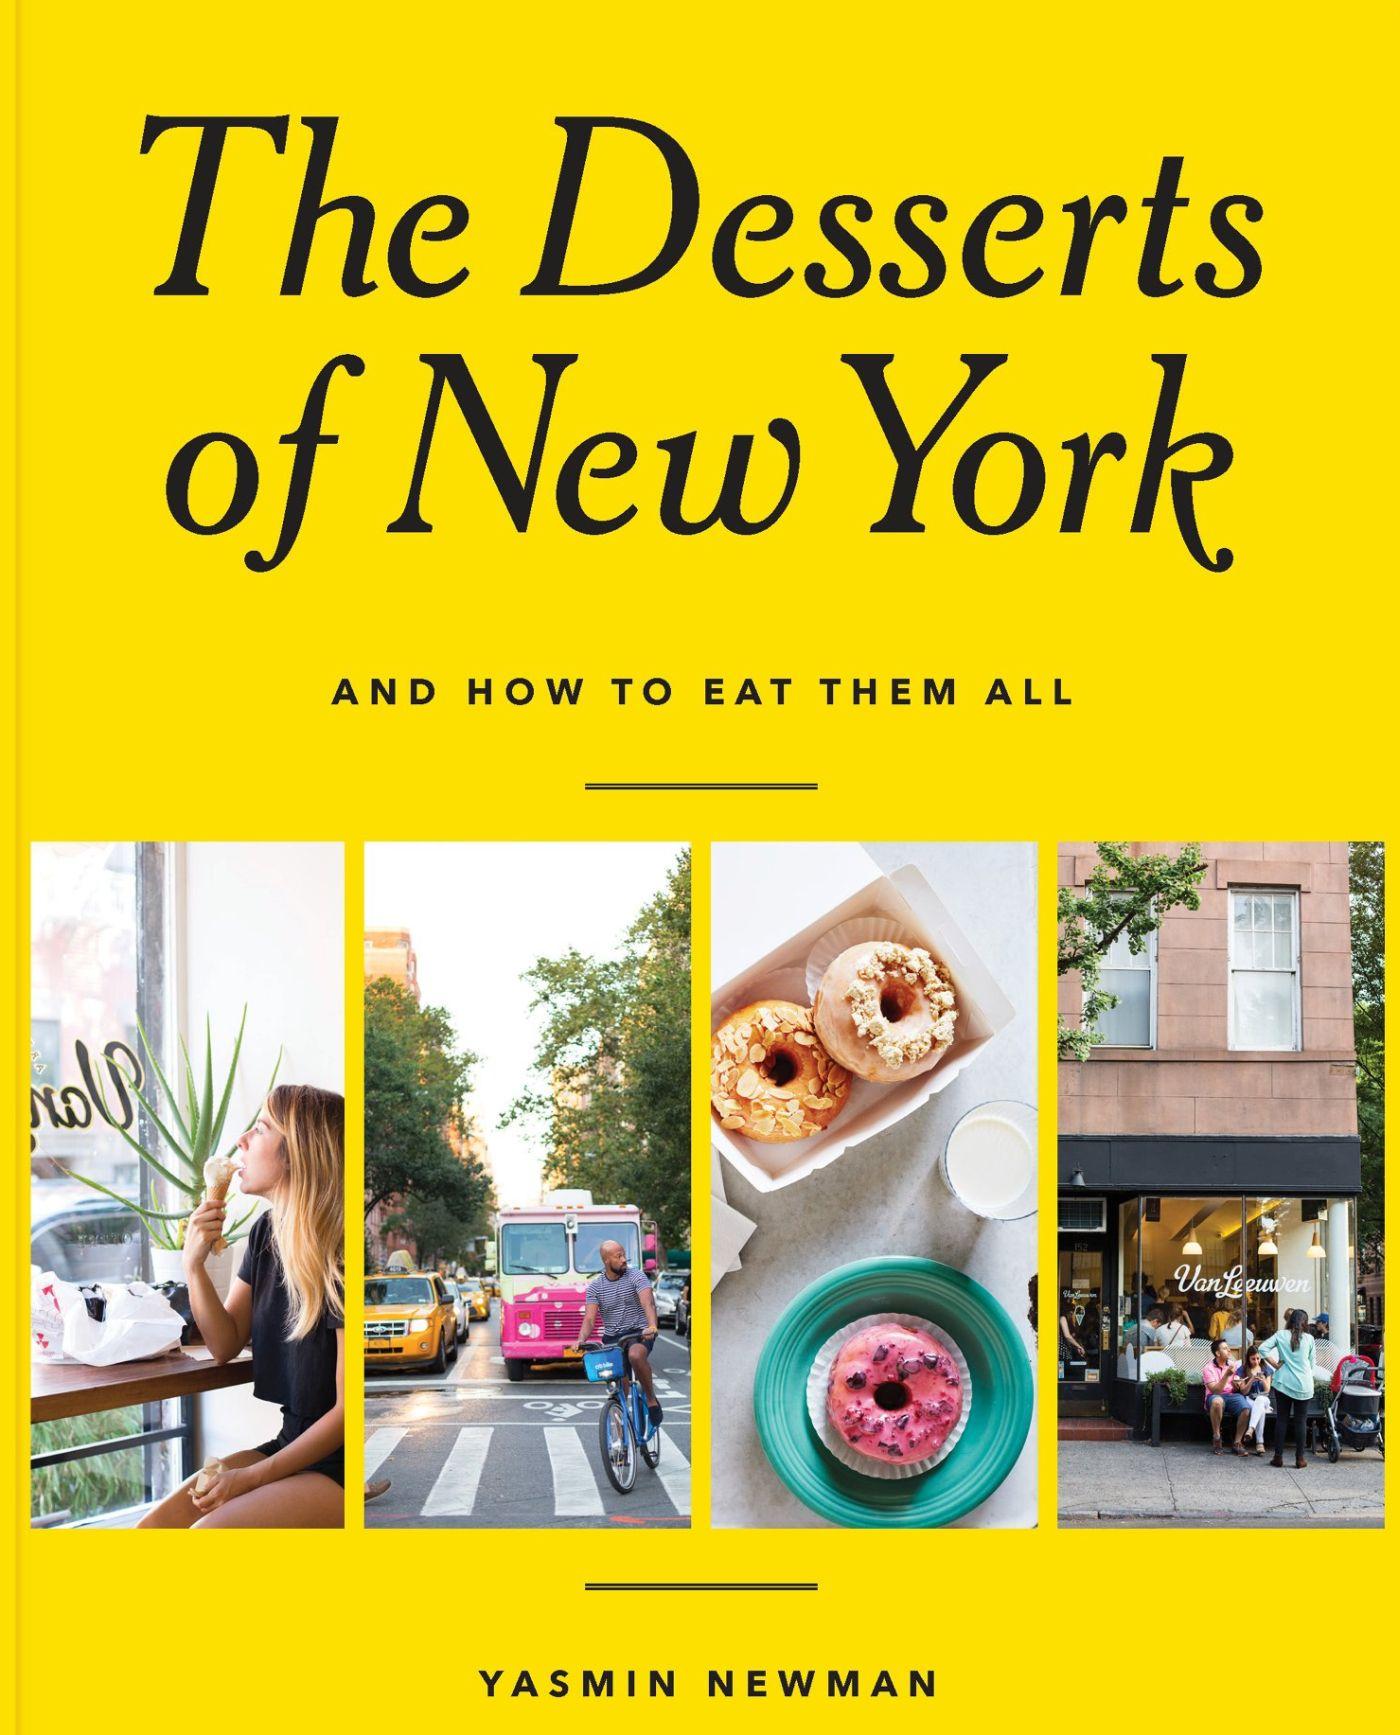 Desserts of New York (And How to Eat Them All)